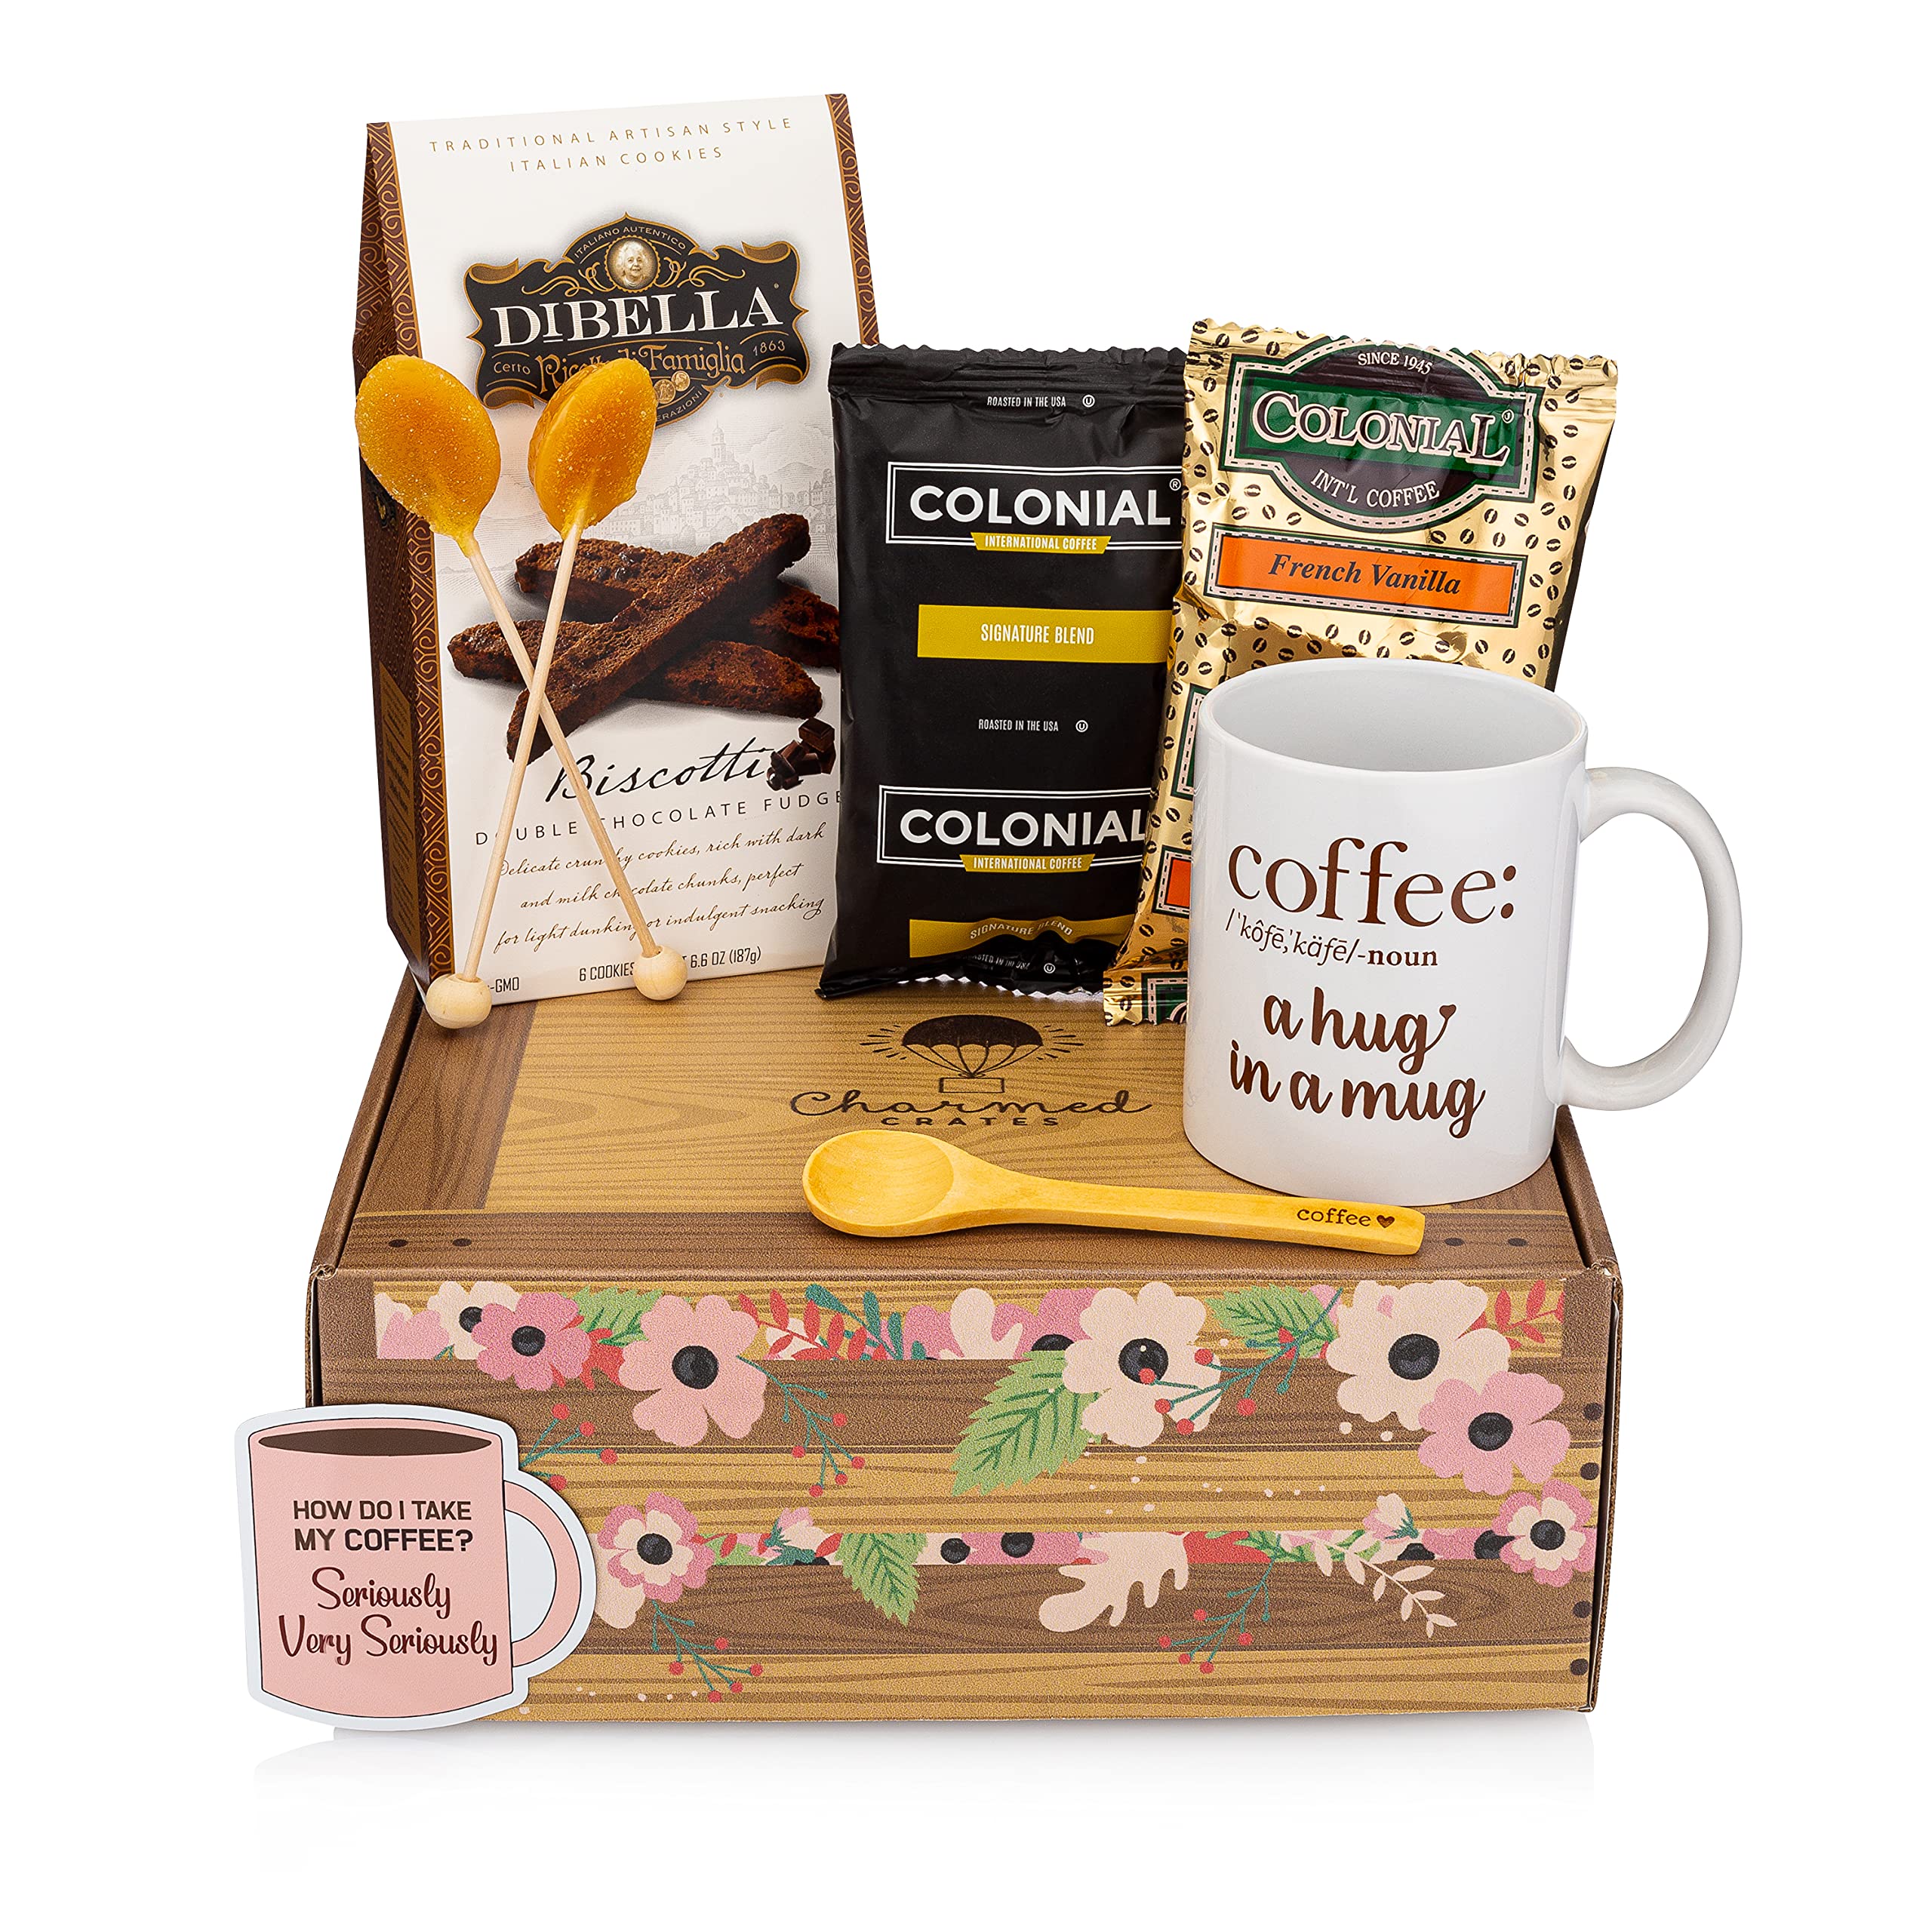 Thank You Gift Boxes | Gourmet Gift Baskets With Coffee and Baked Goods –  The Meeting Place on Market